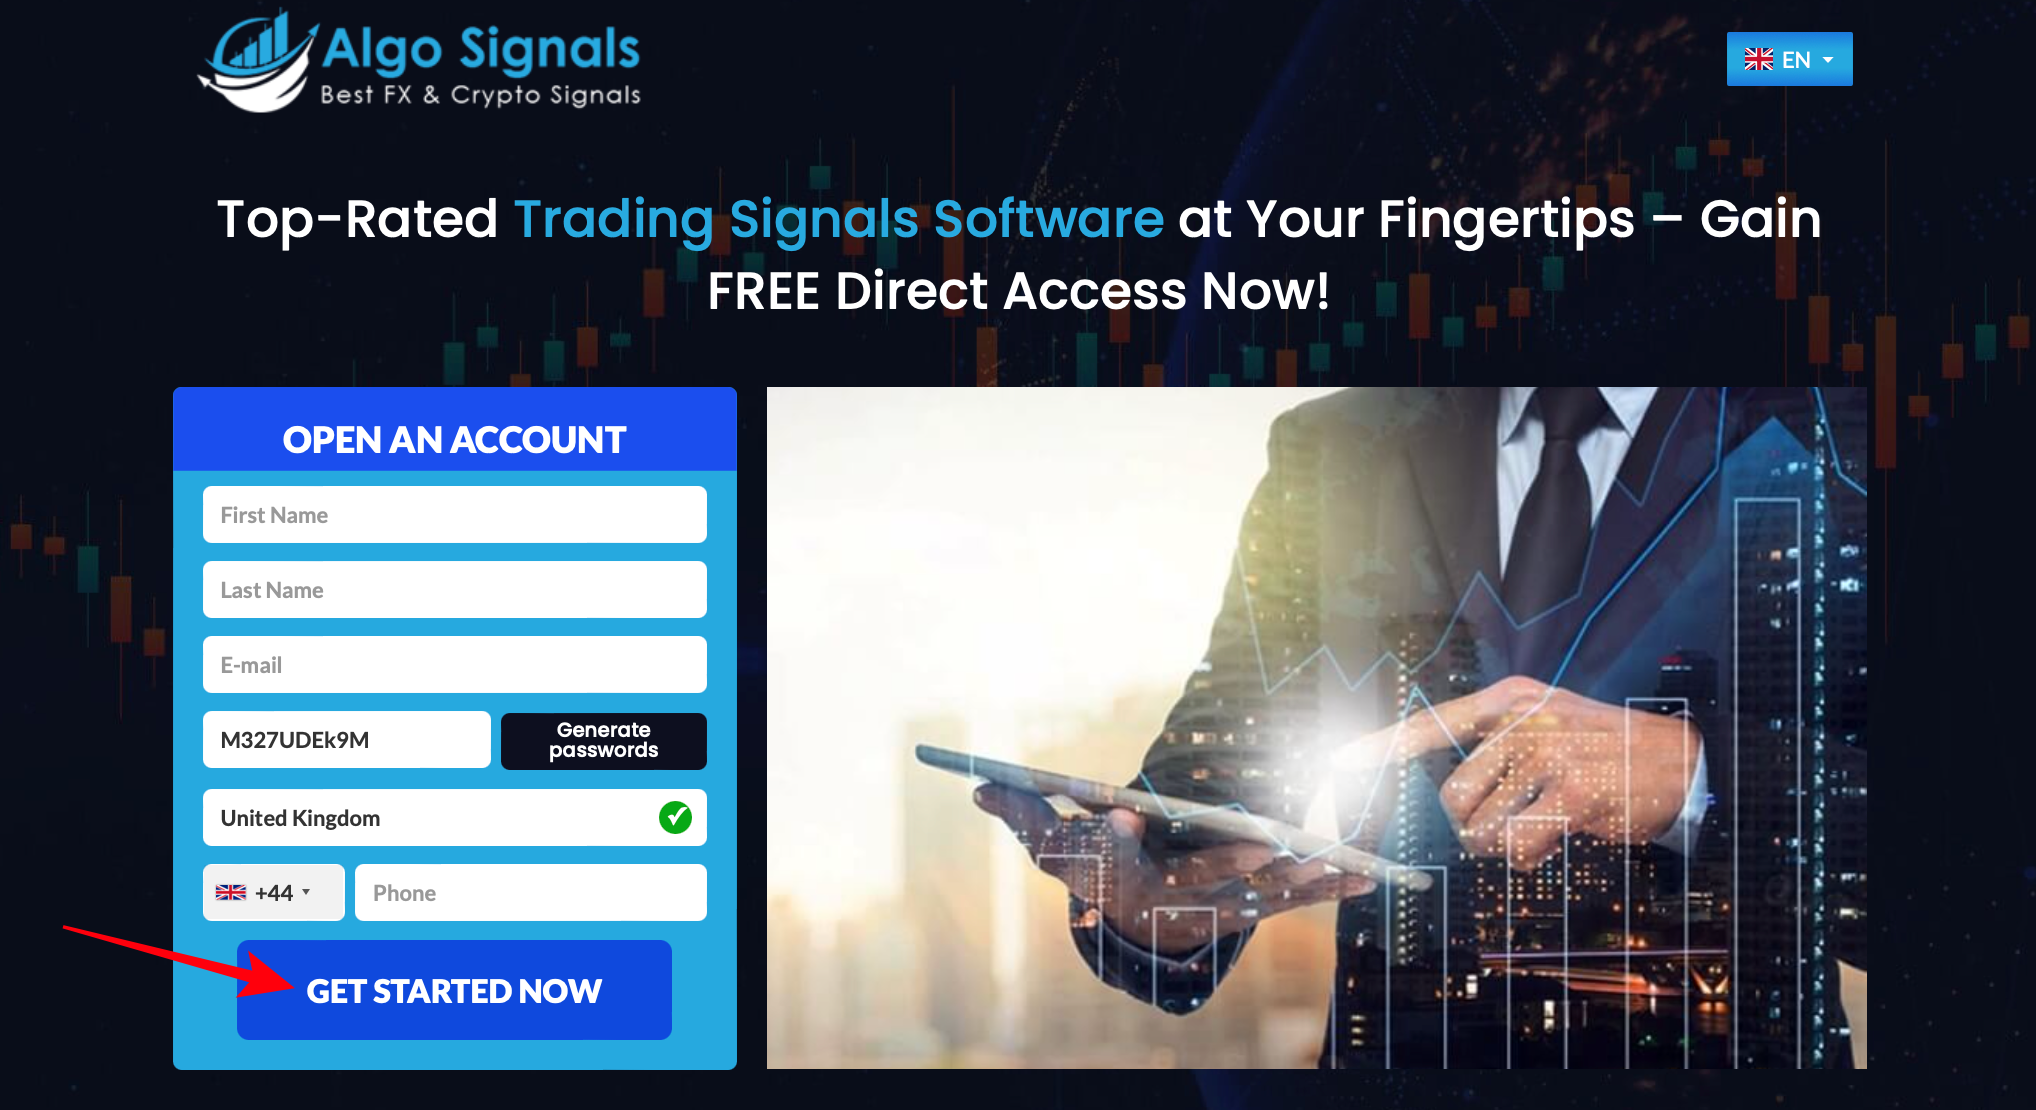 How to open an account on Algo Signals